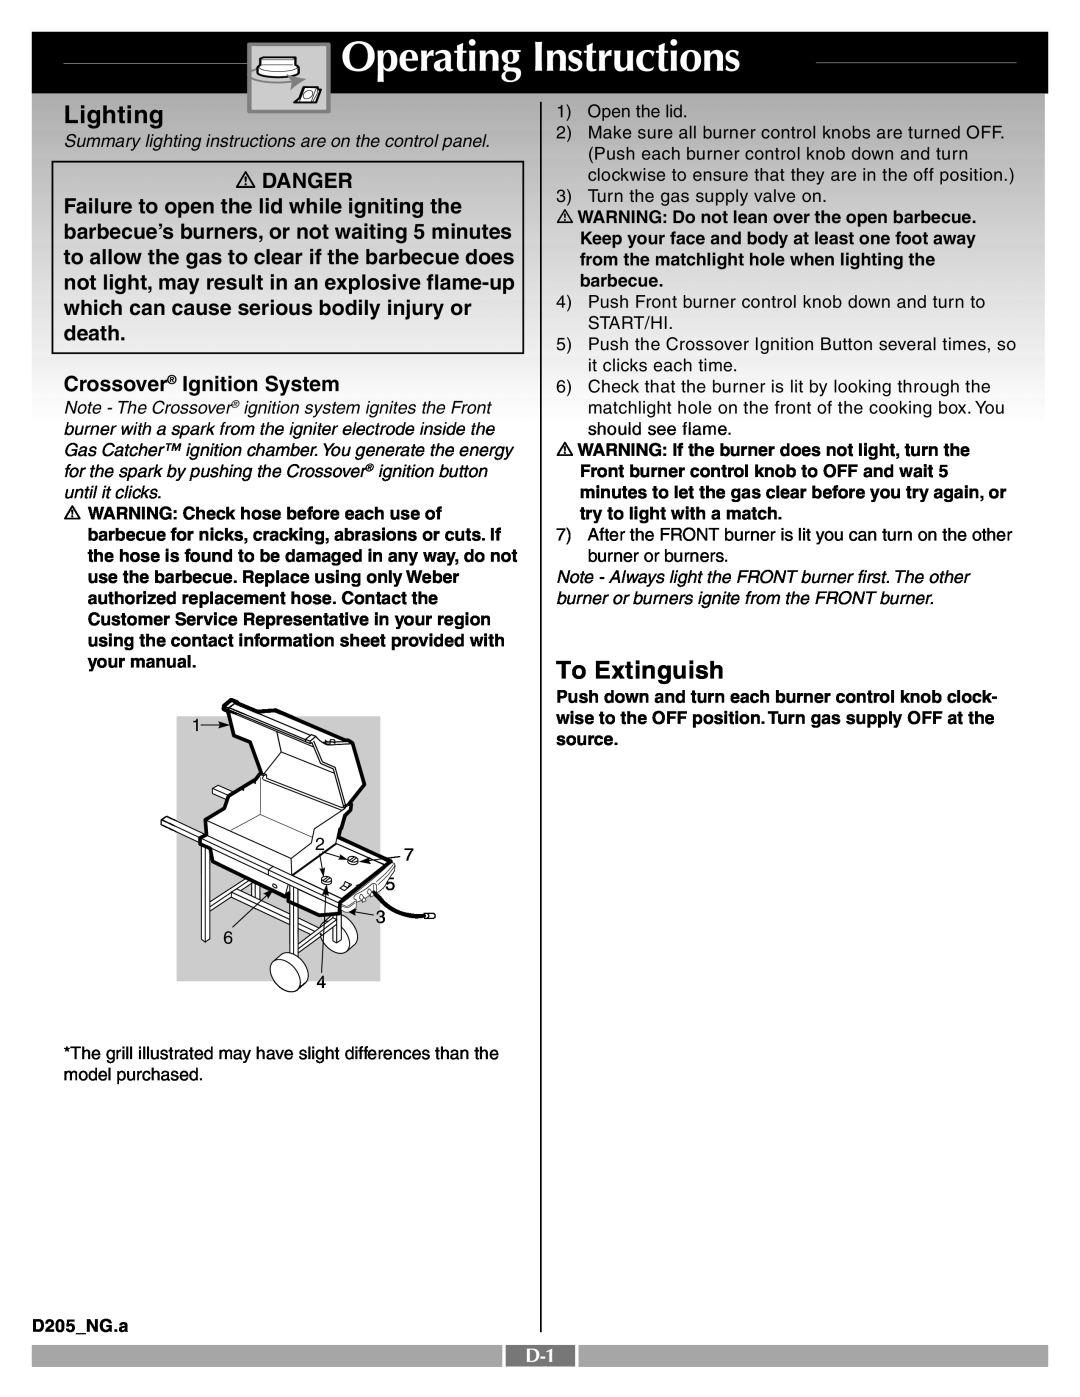 Weber 55548 Operating Instructions, Lighting, To Extinguish, Failure to open the lid while igniting the, death, Danger 